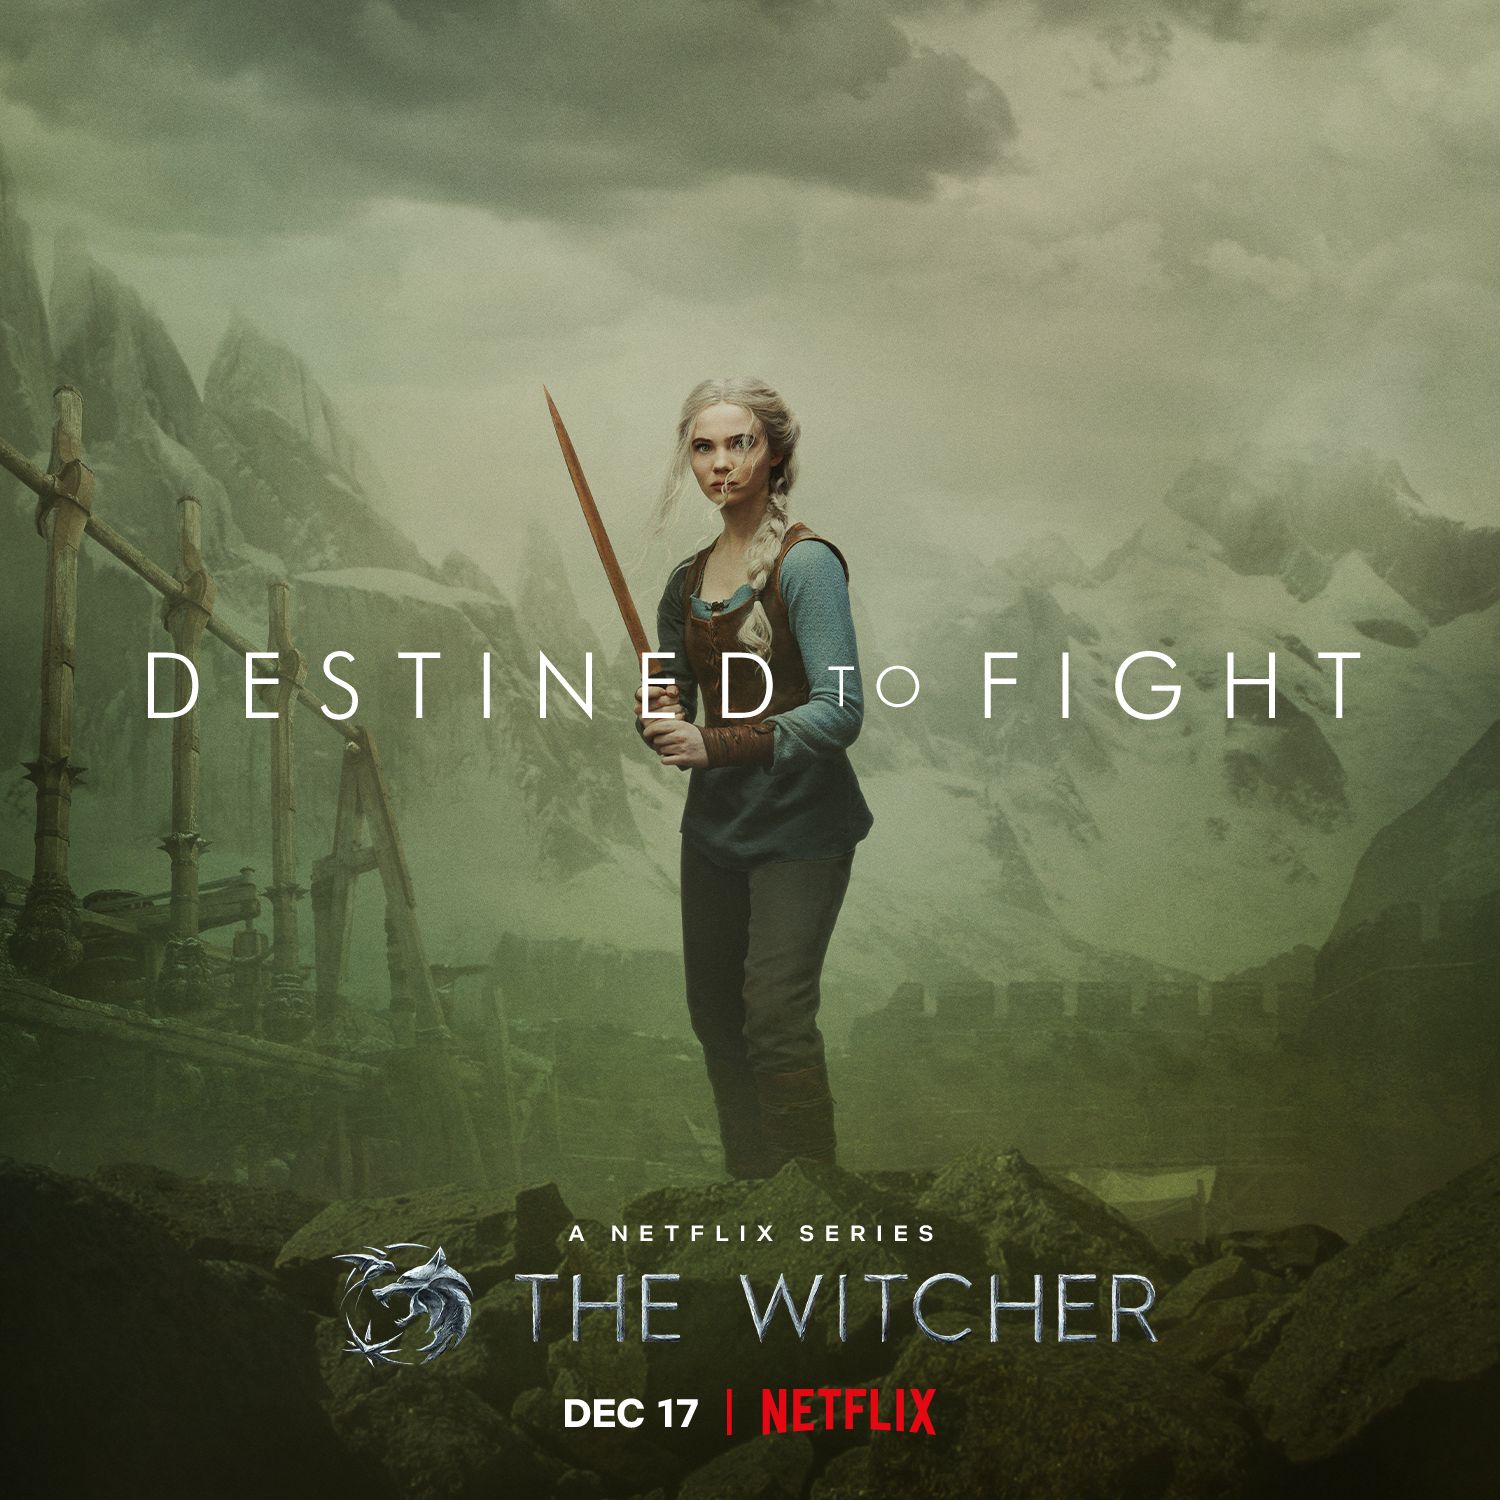 The Witcher Season 2 Poster Reveals New Look At Ciri Training To Fight